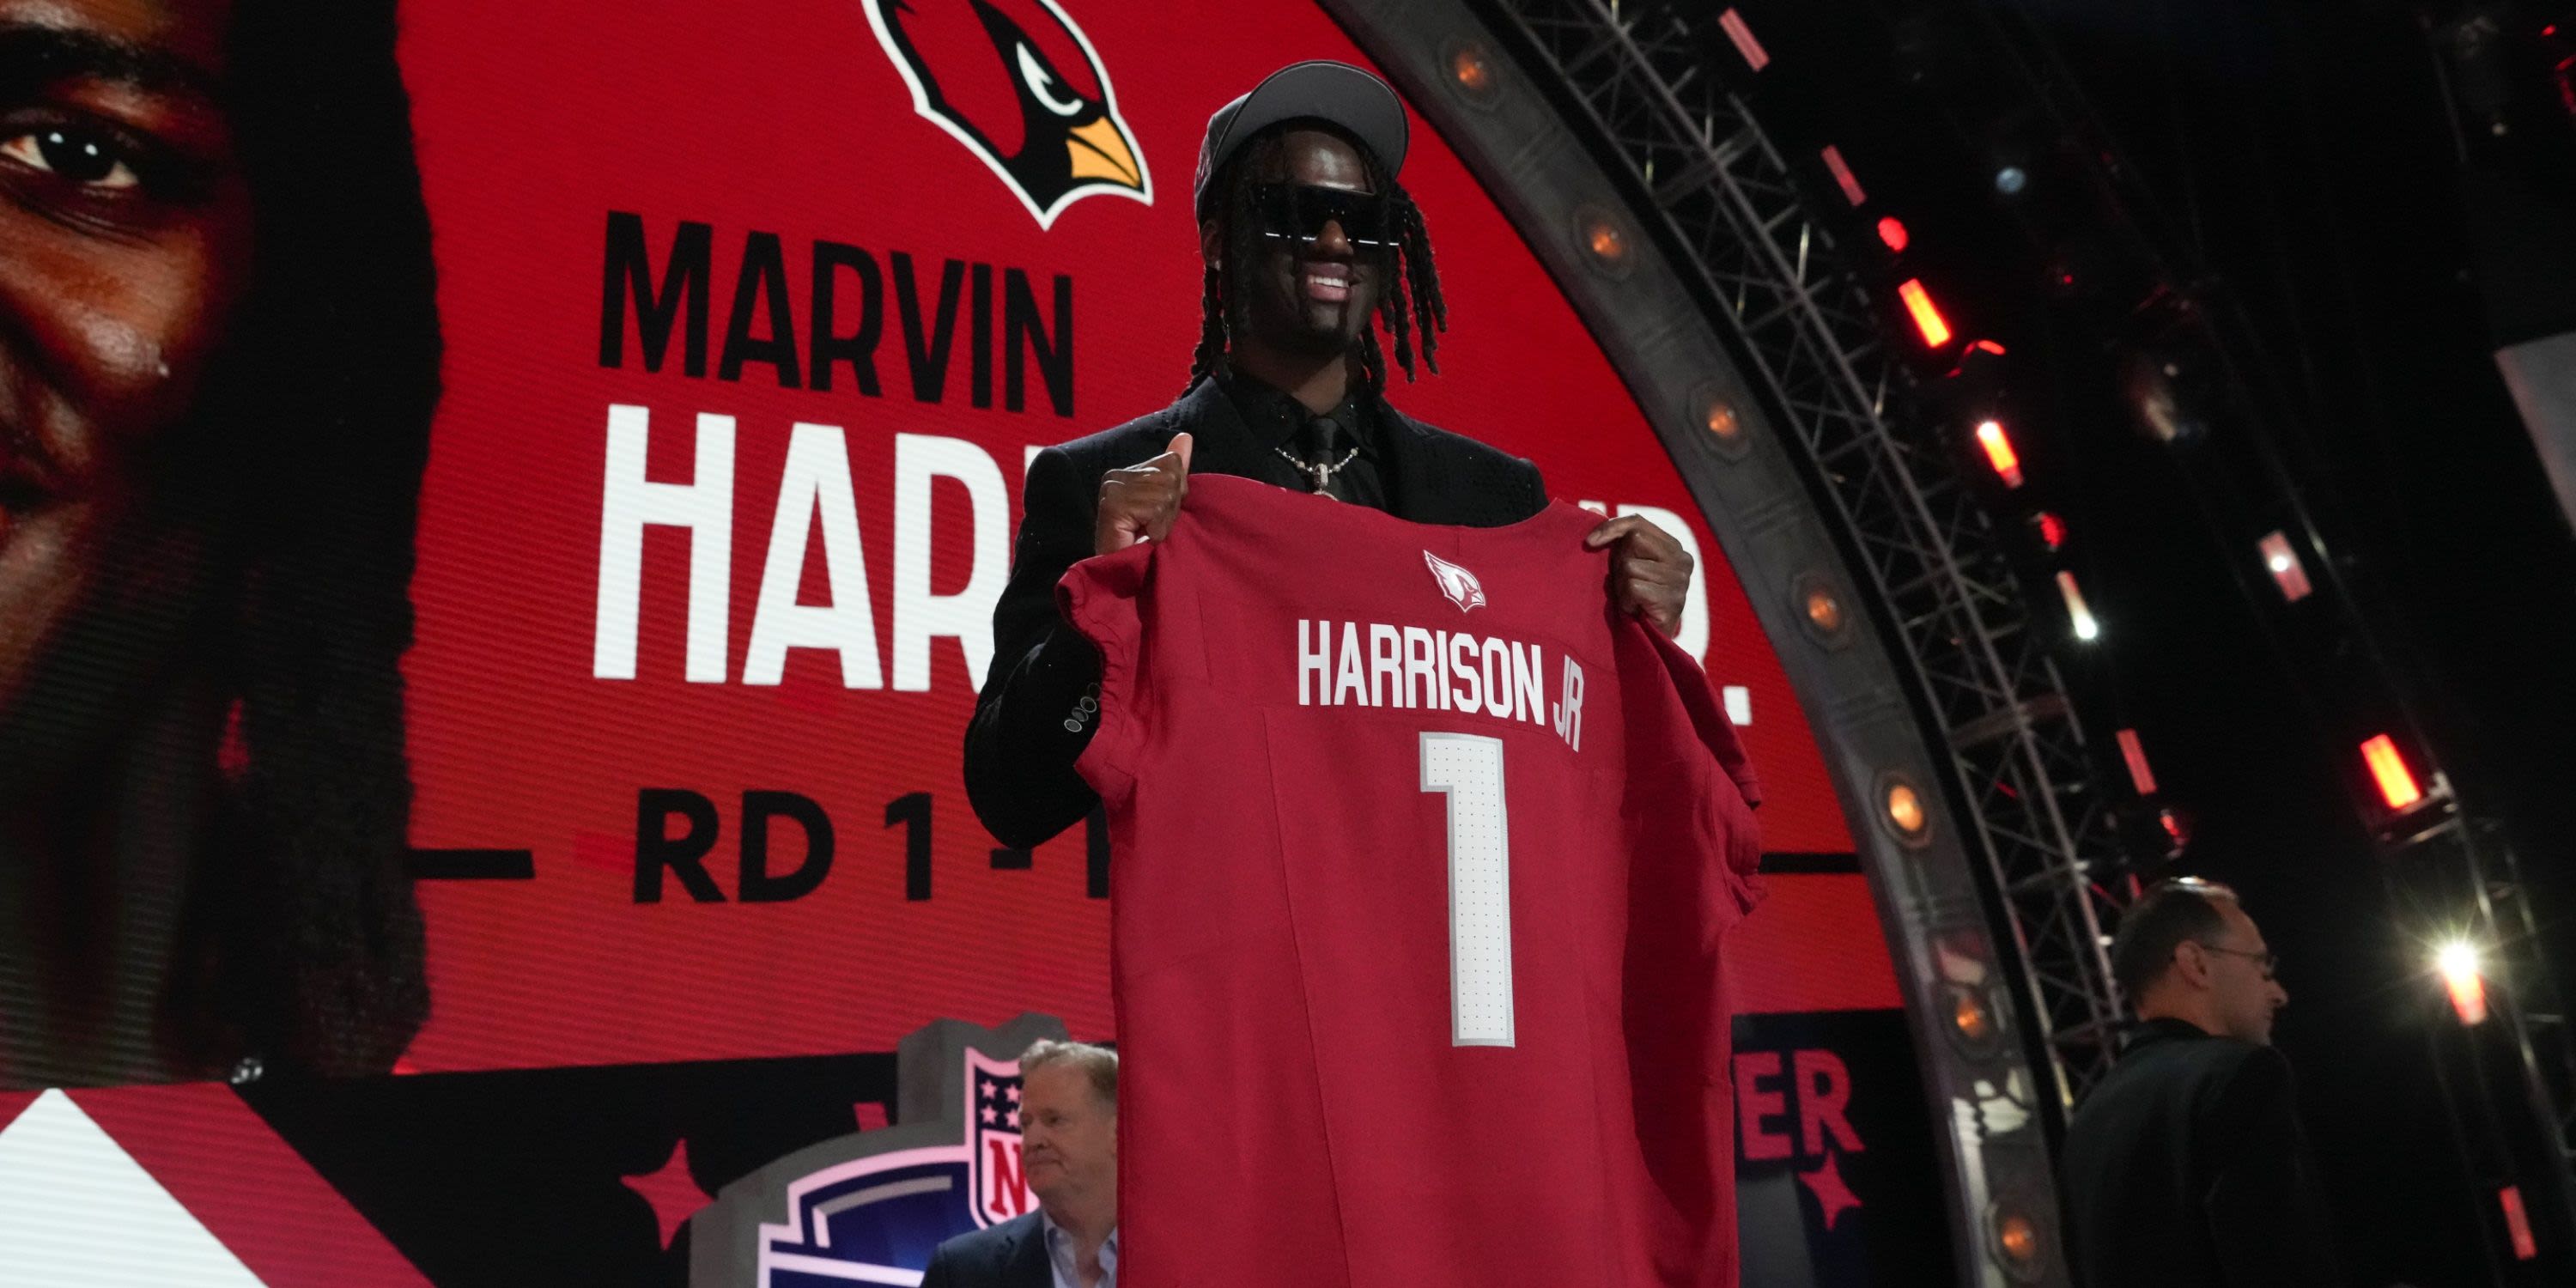 MHJ Finally Signs With Cardinals, Allowing Jersey To Go On Sale